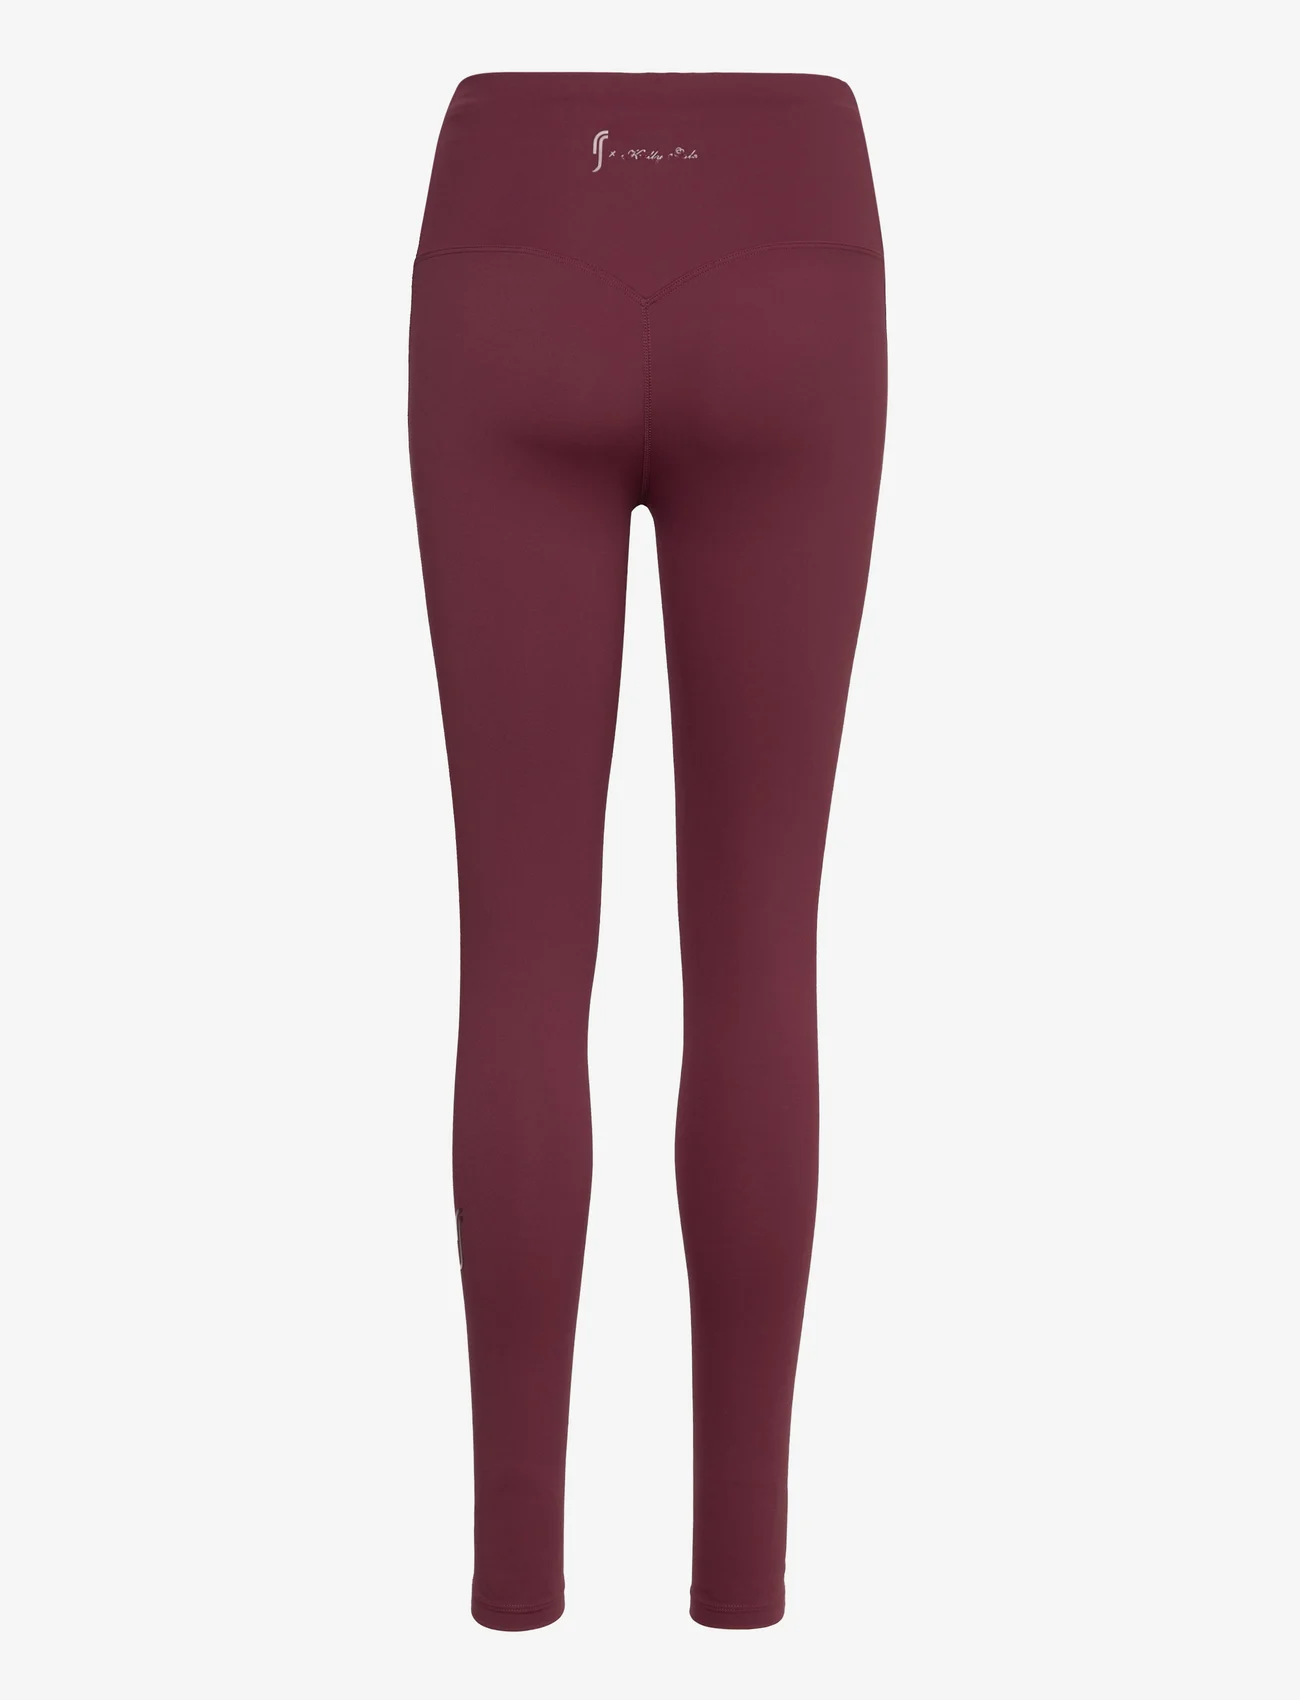 RS Sports - Kelly Tights - lauf-& trainingstights - bordeaux - 1